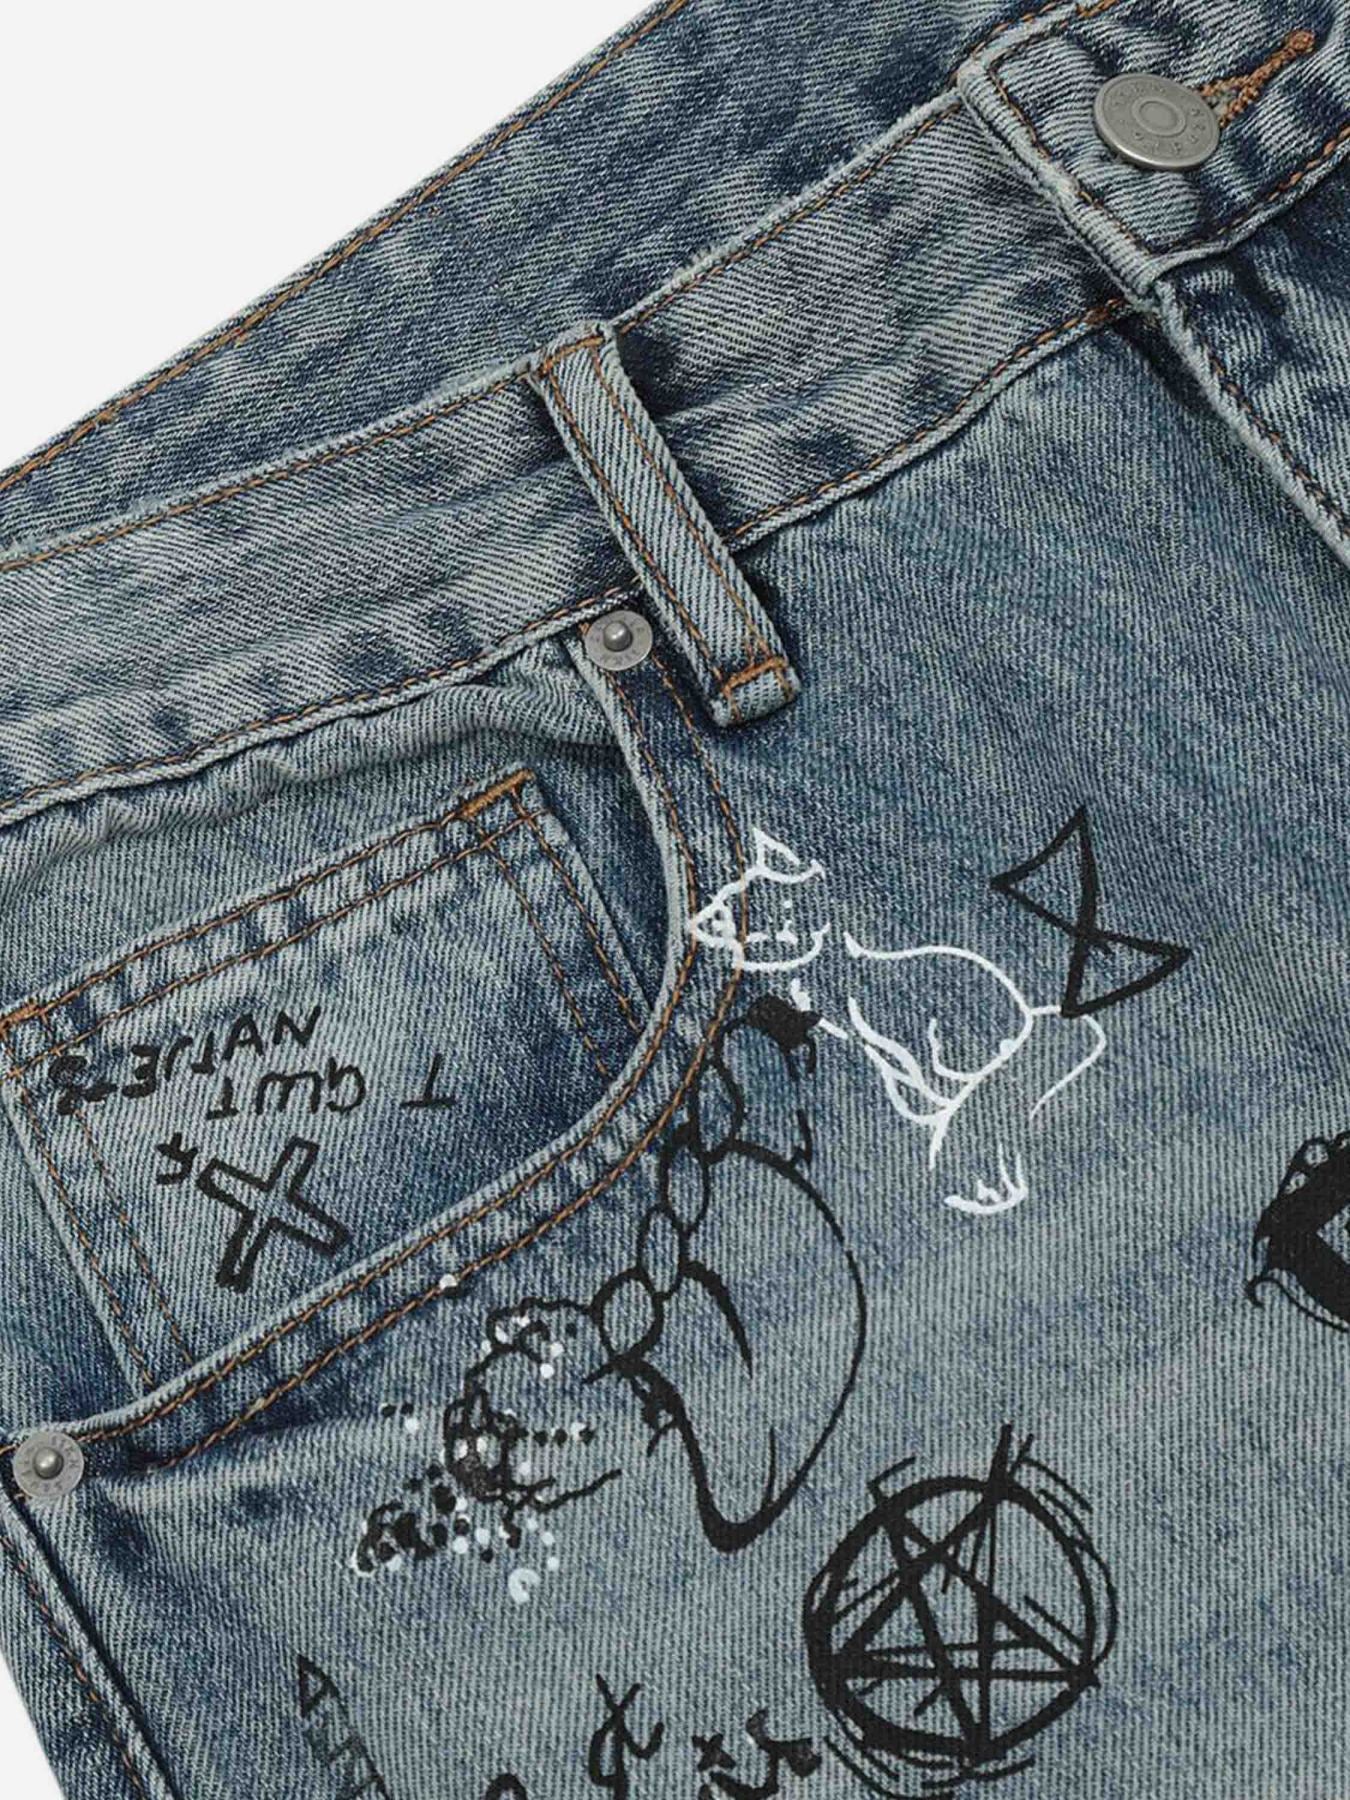 The Supermade Washed Graffiti Ripped Jeans